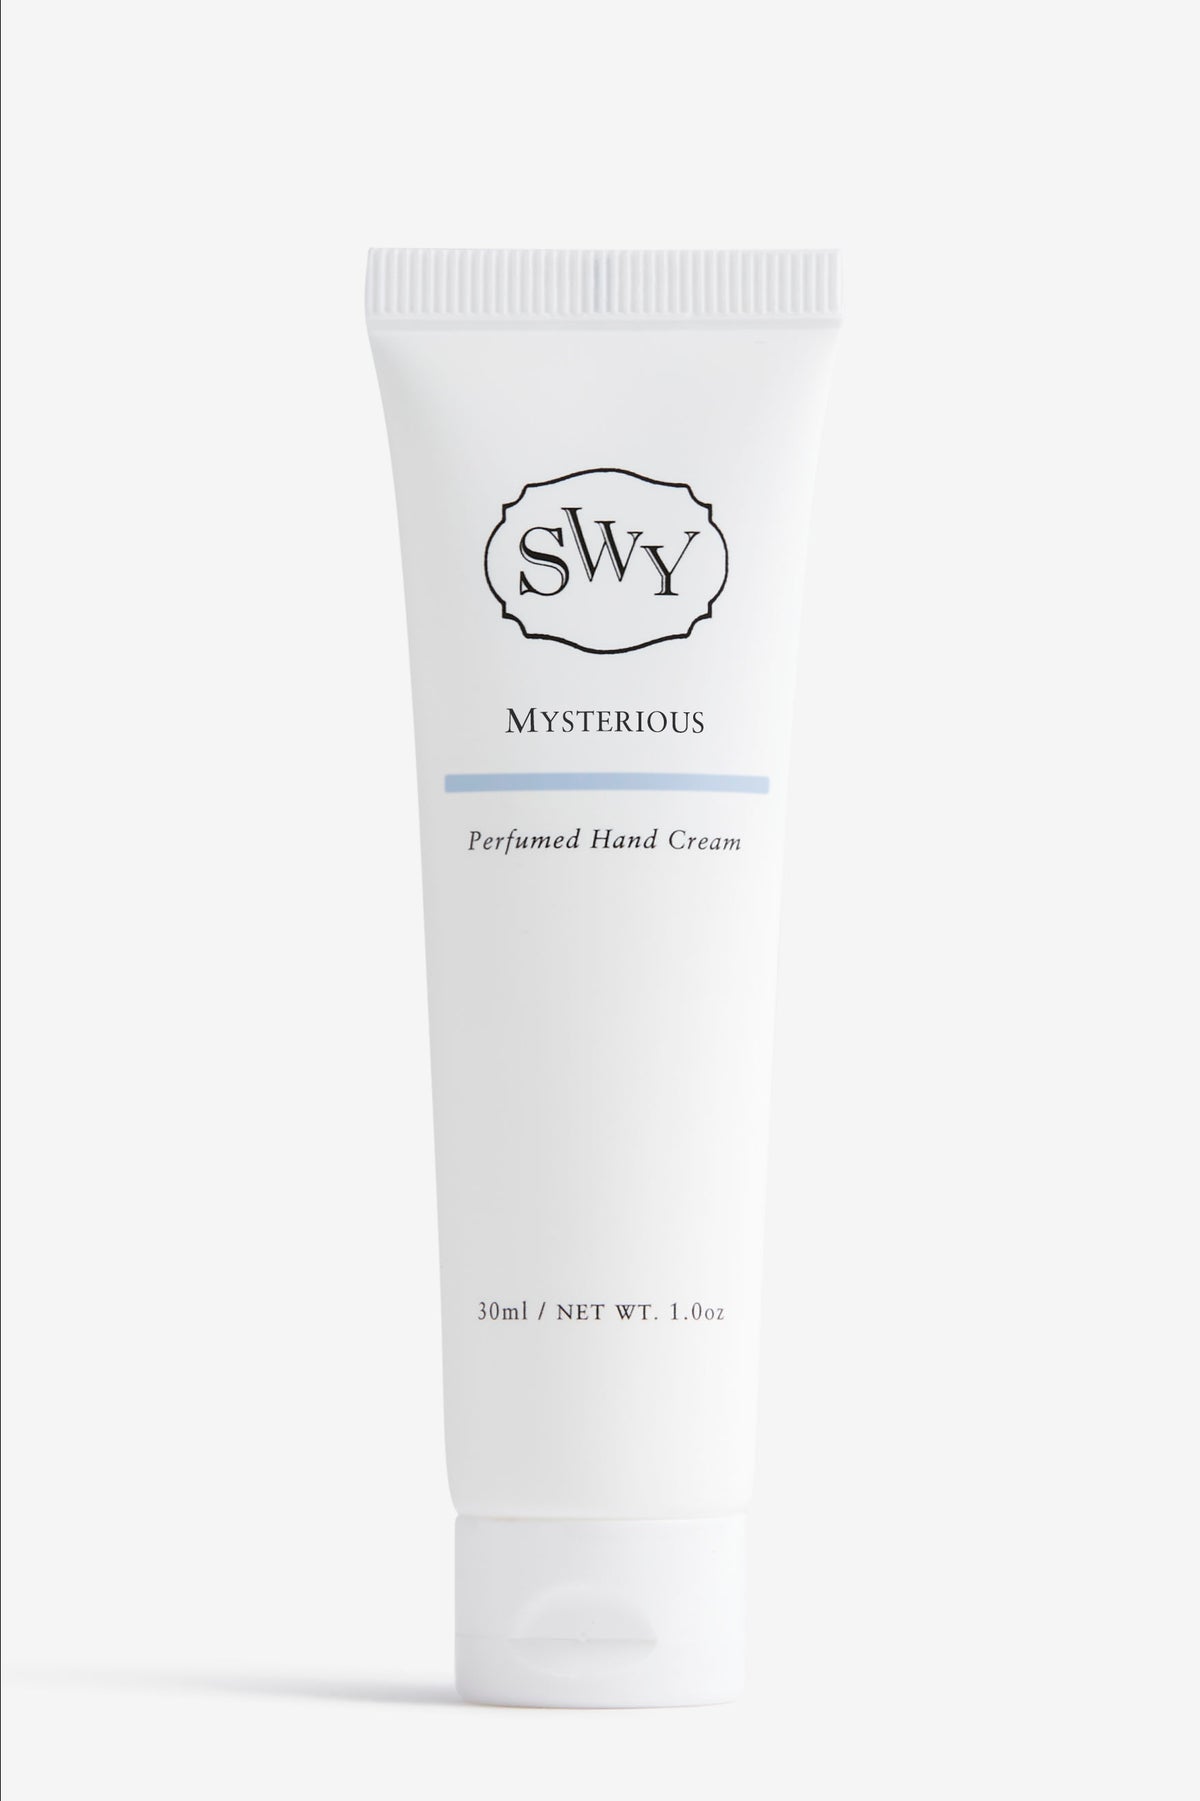 Hand Cream - pocket size - Mysterious